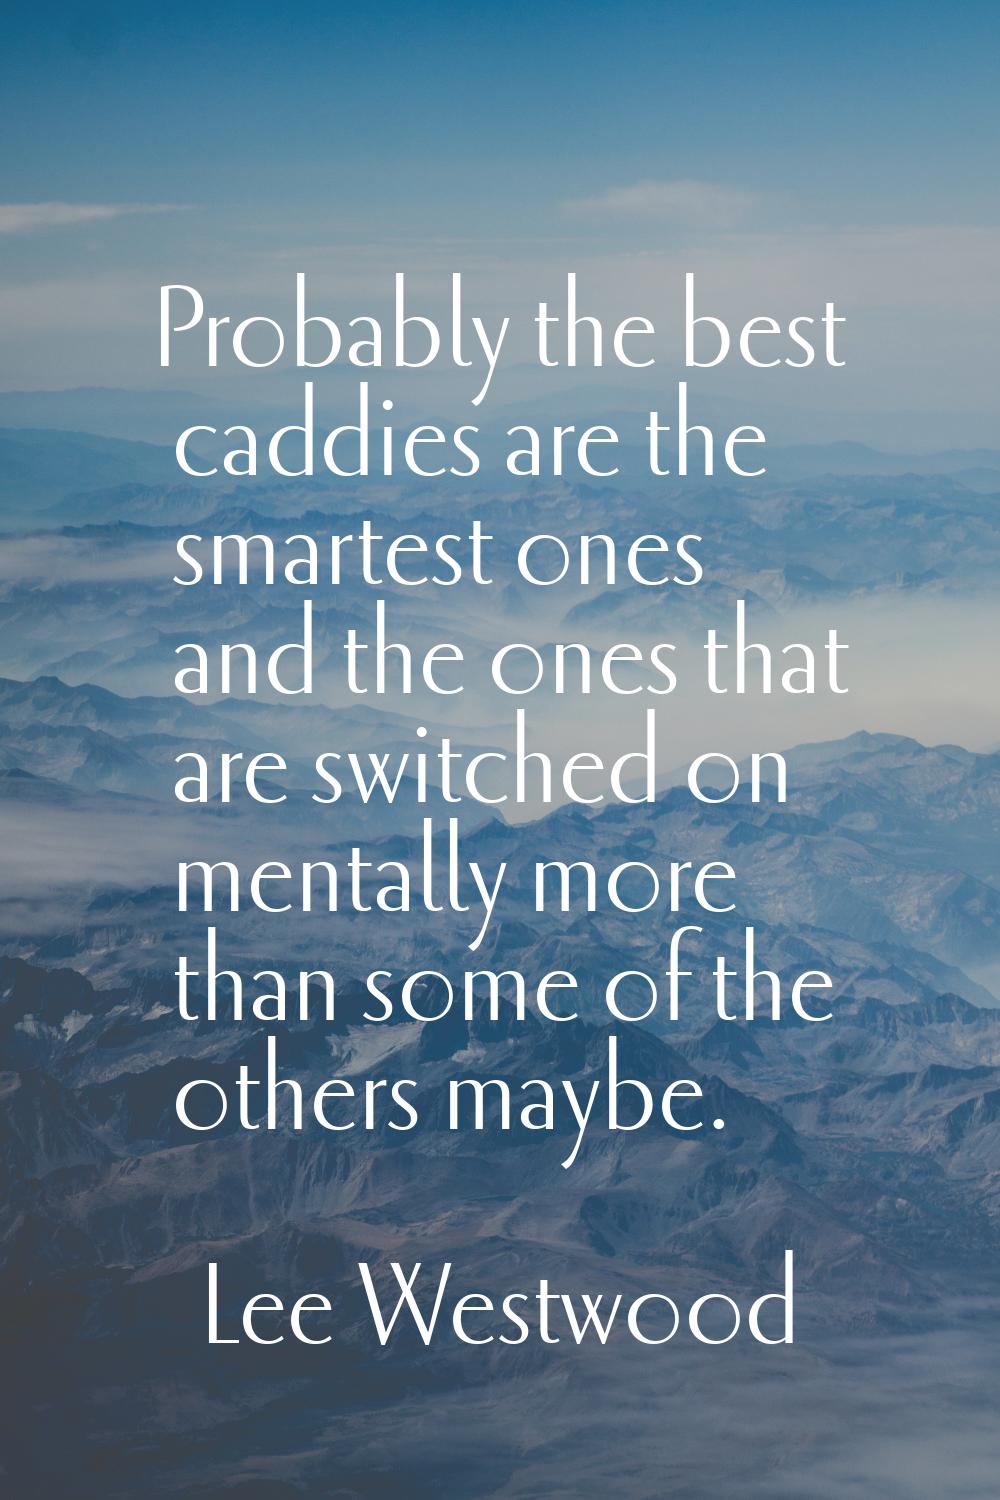 Probably the best caddies are the smartest ones and the ones that are switched on mentally more tha